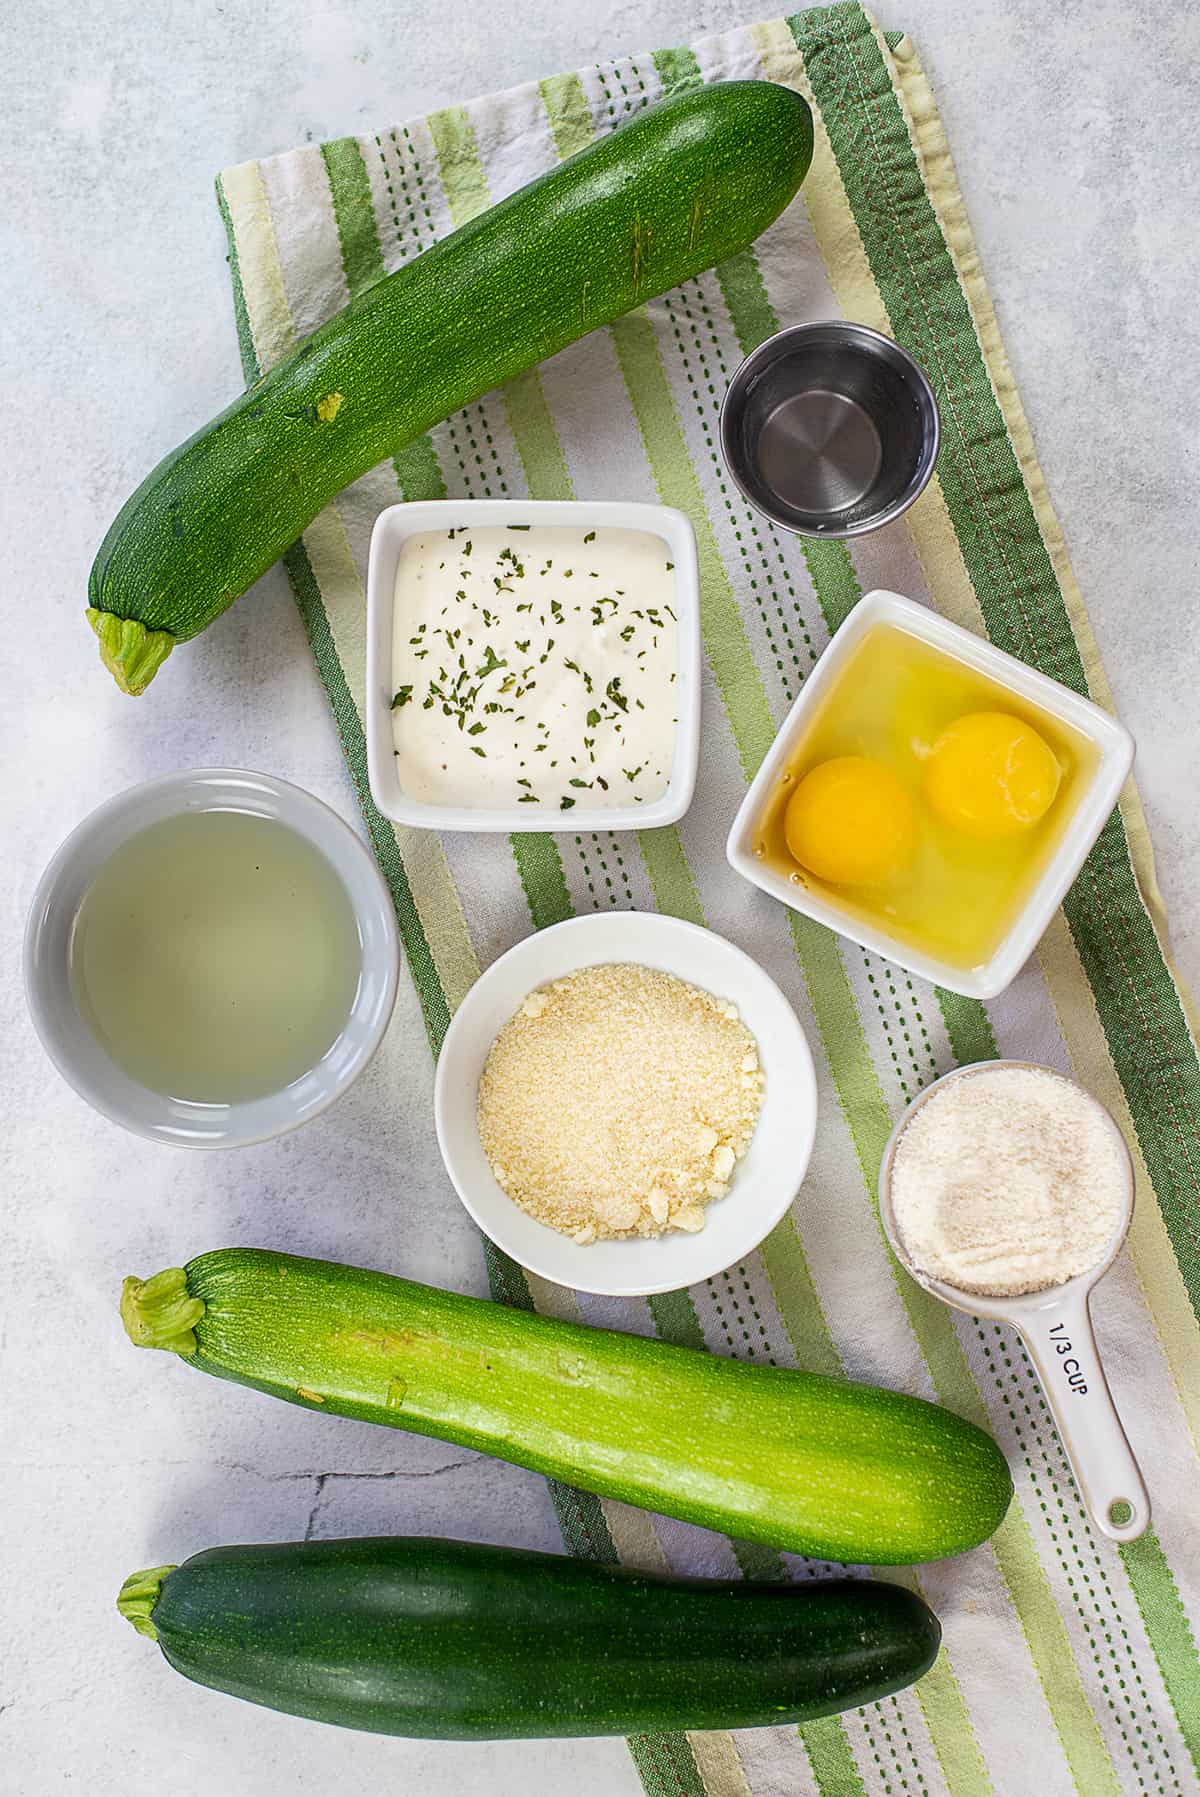 ingredients for fried zucchini recipe